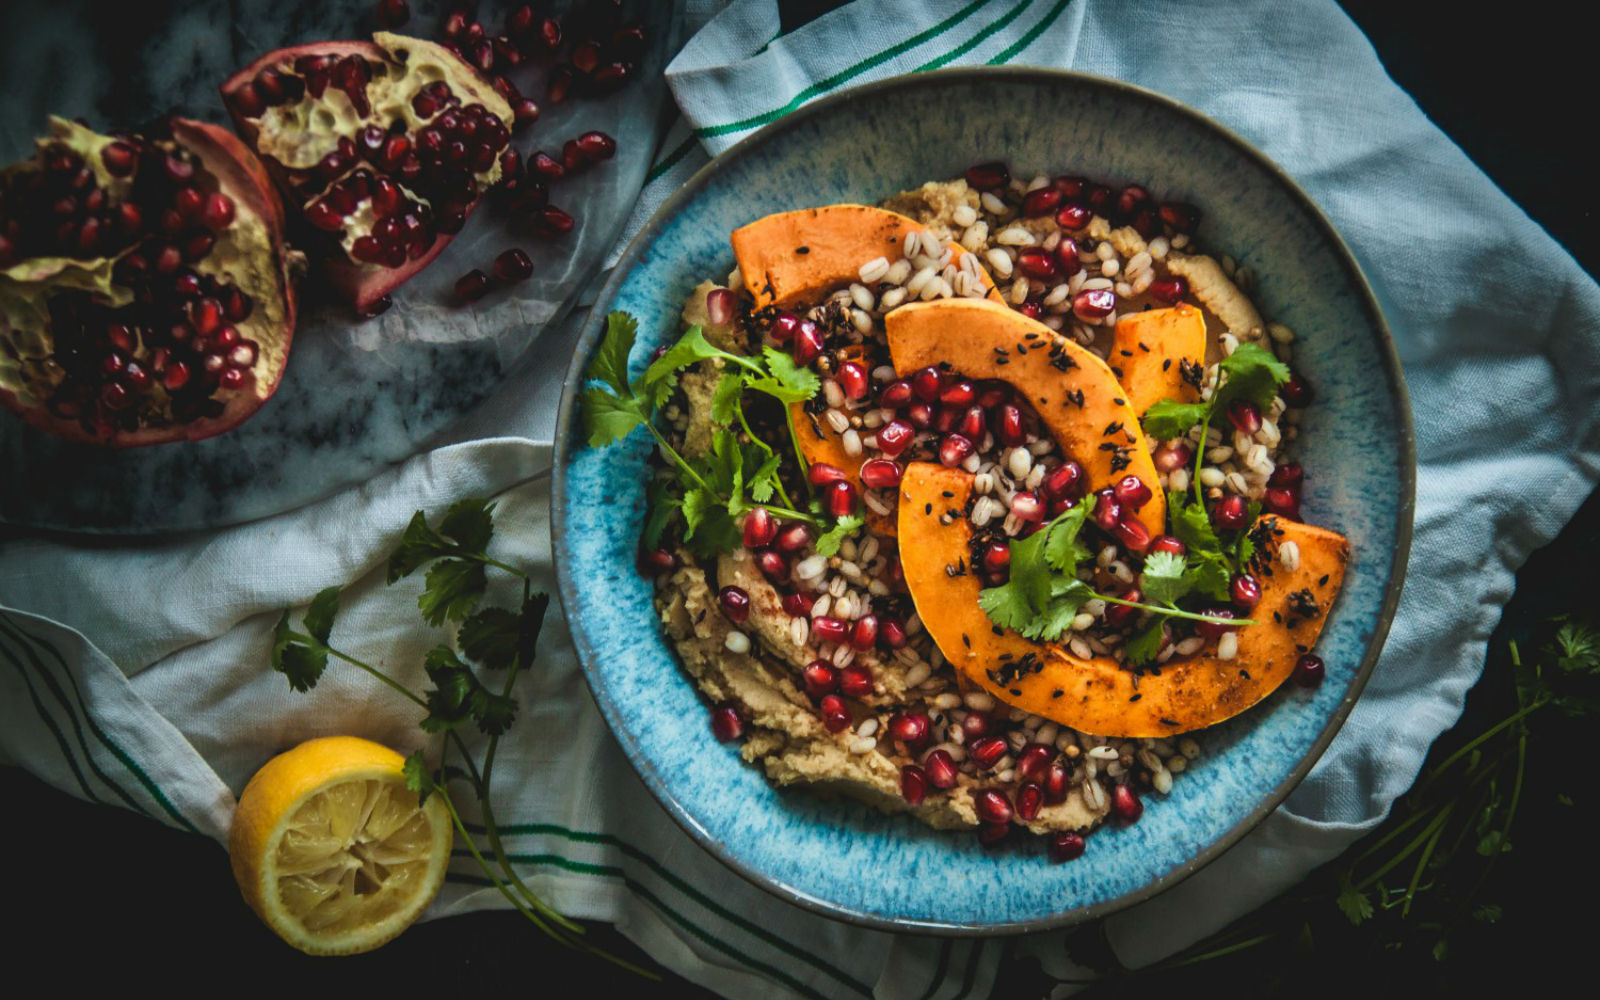 Vegan Valentine's Hummus and Pearl Barley Bowls with butternut squash and sesame seeds